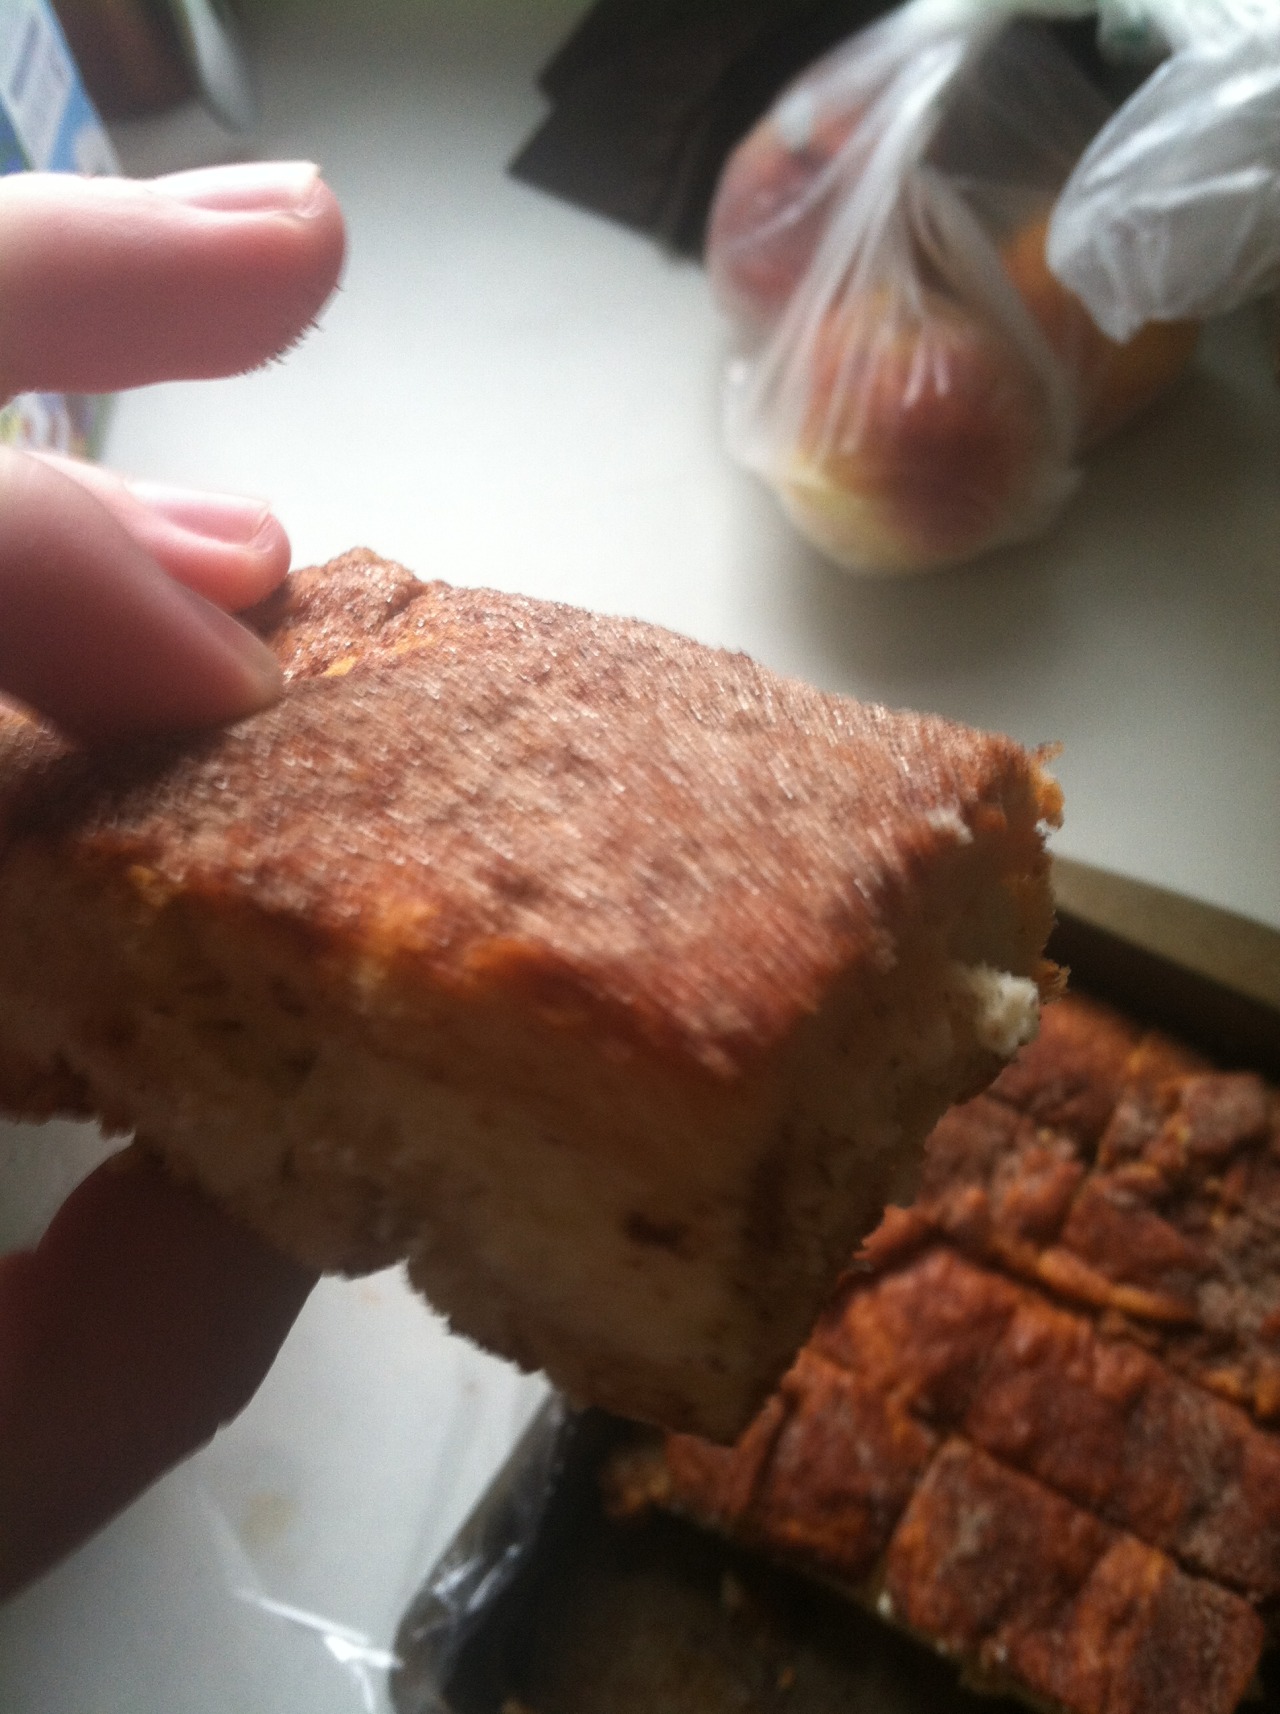 I made some cinnamon sugar cheesecake bars, testing out some cooking tools I got